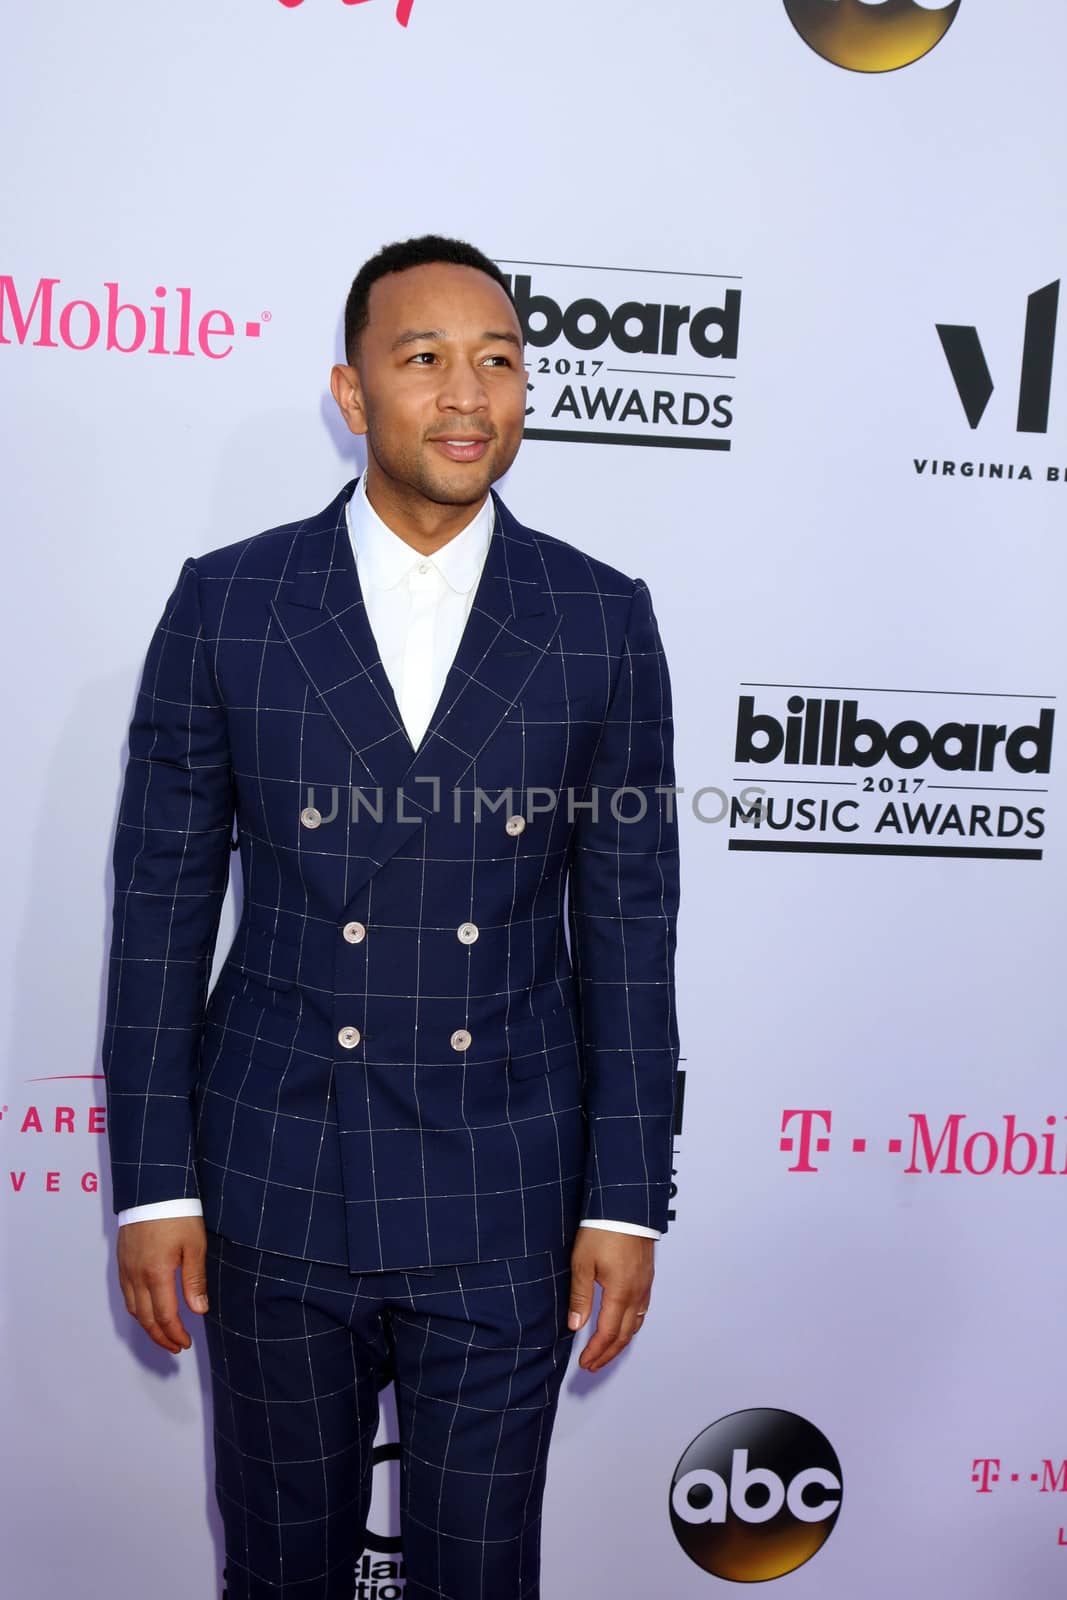 John Legend
at the 2017 Billboard Awards Arrivals, T-Mobile Arena, Las Vegas, NV 05-21-17/ImageCollect by ImageCollect